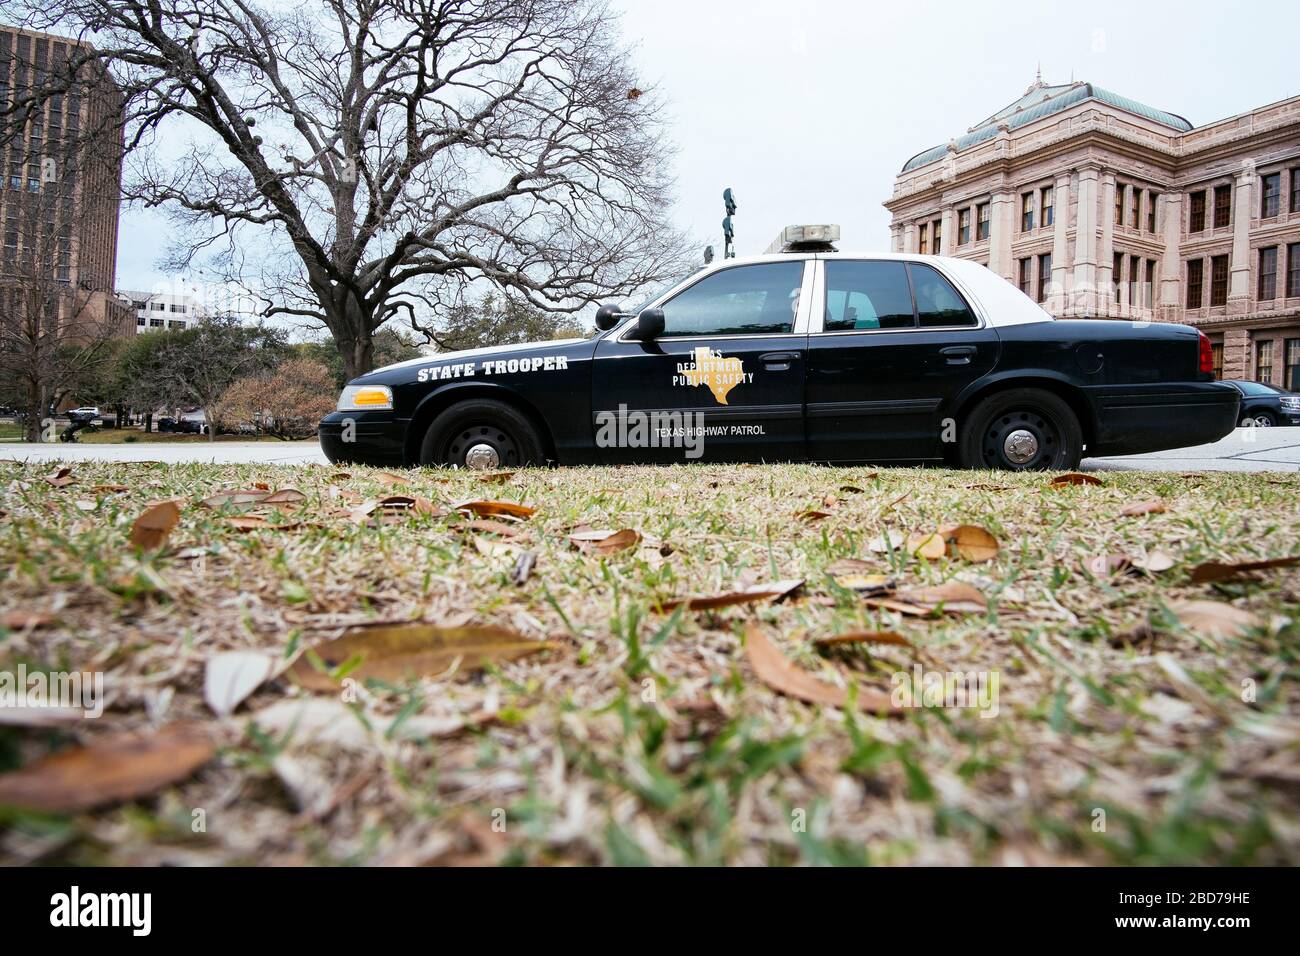 A highway patrol car outside Texas Capitol in Austin, Texas Stock Photo